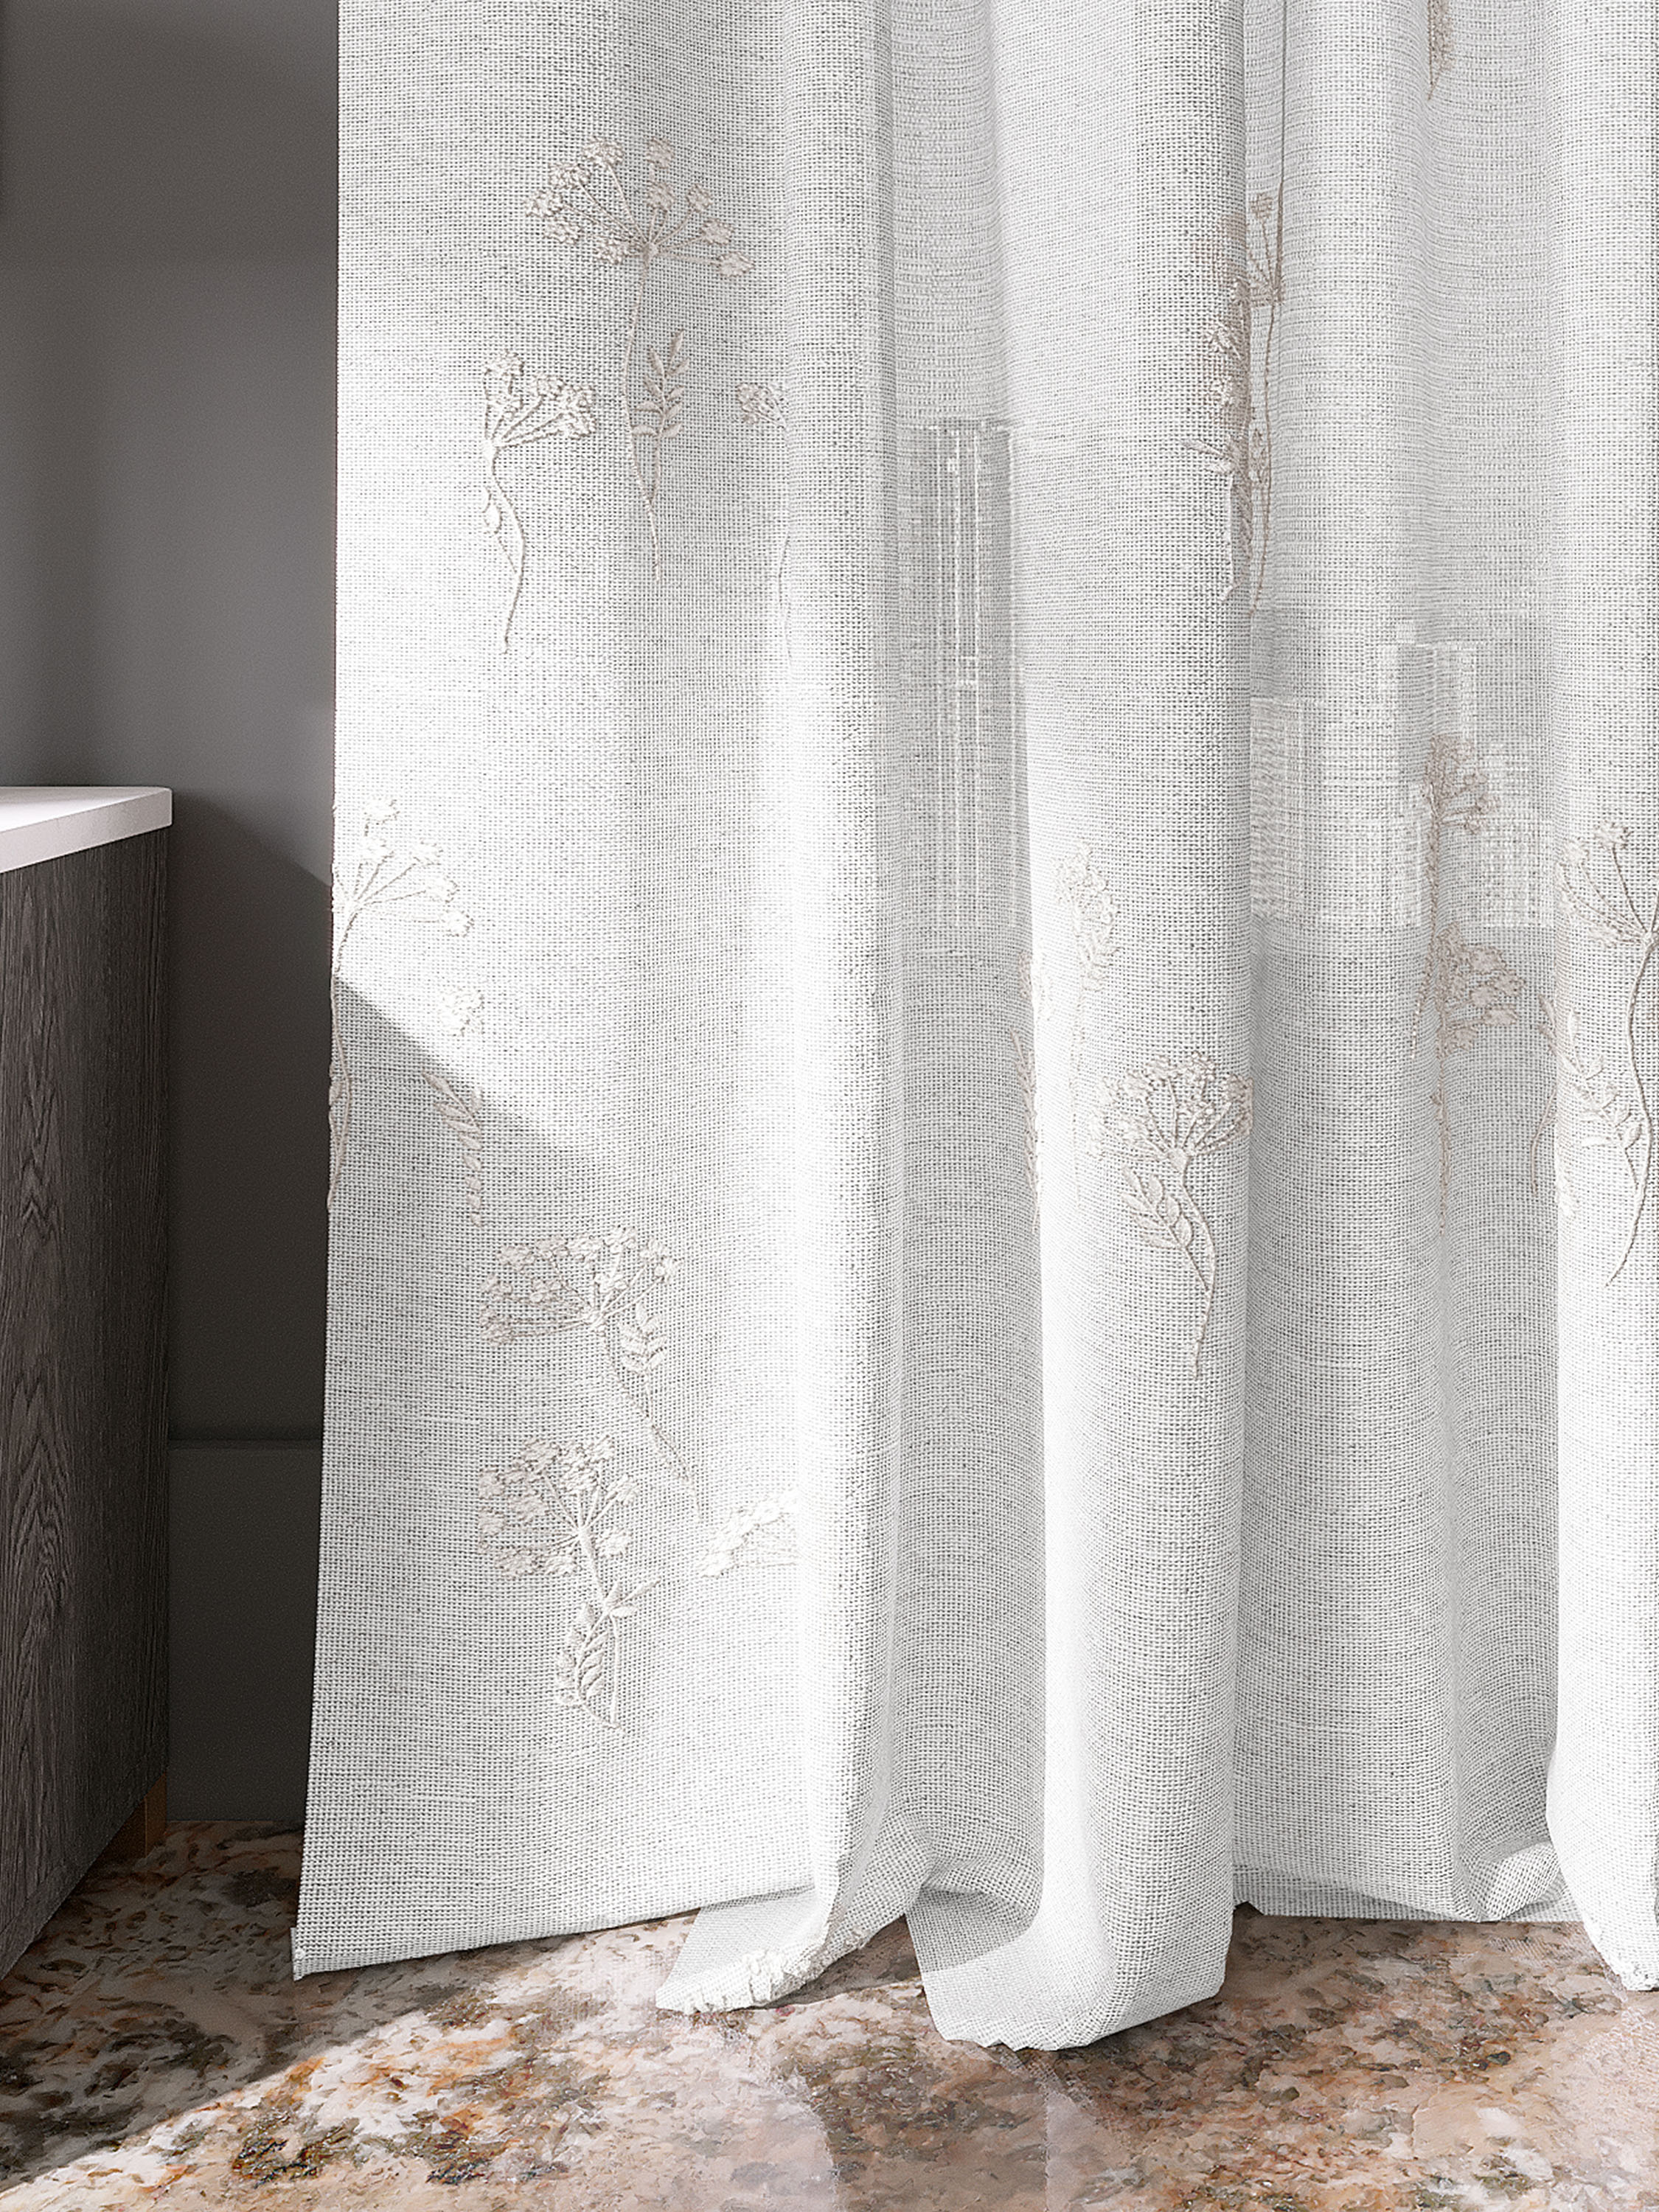 embroidered curtains hand crafted on a textured sheer